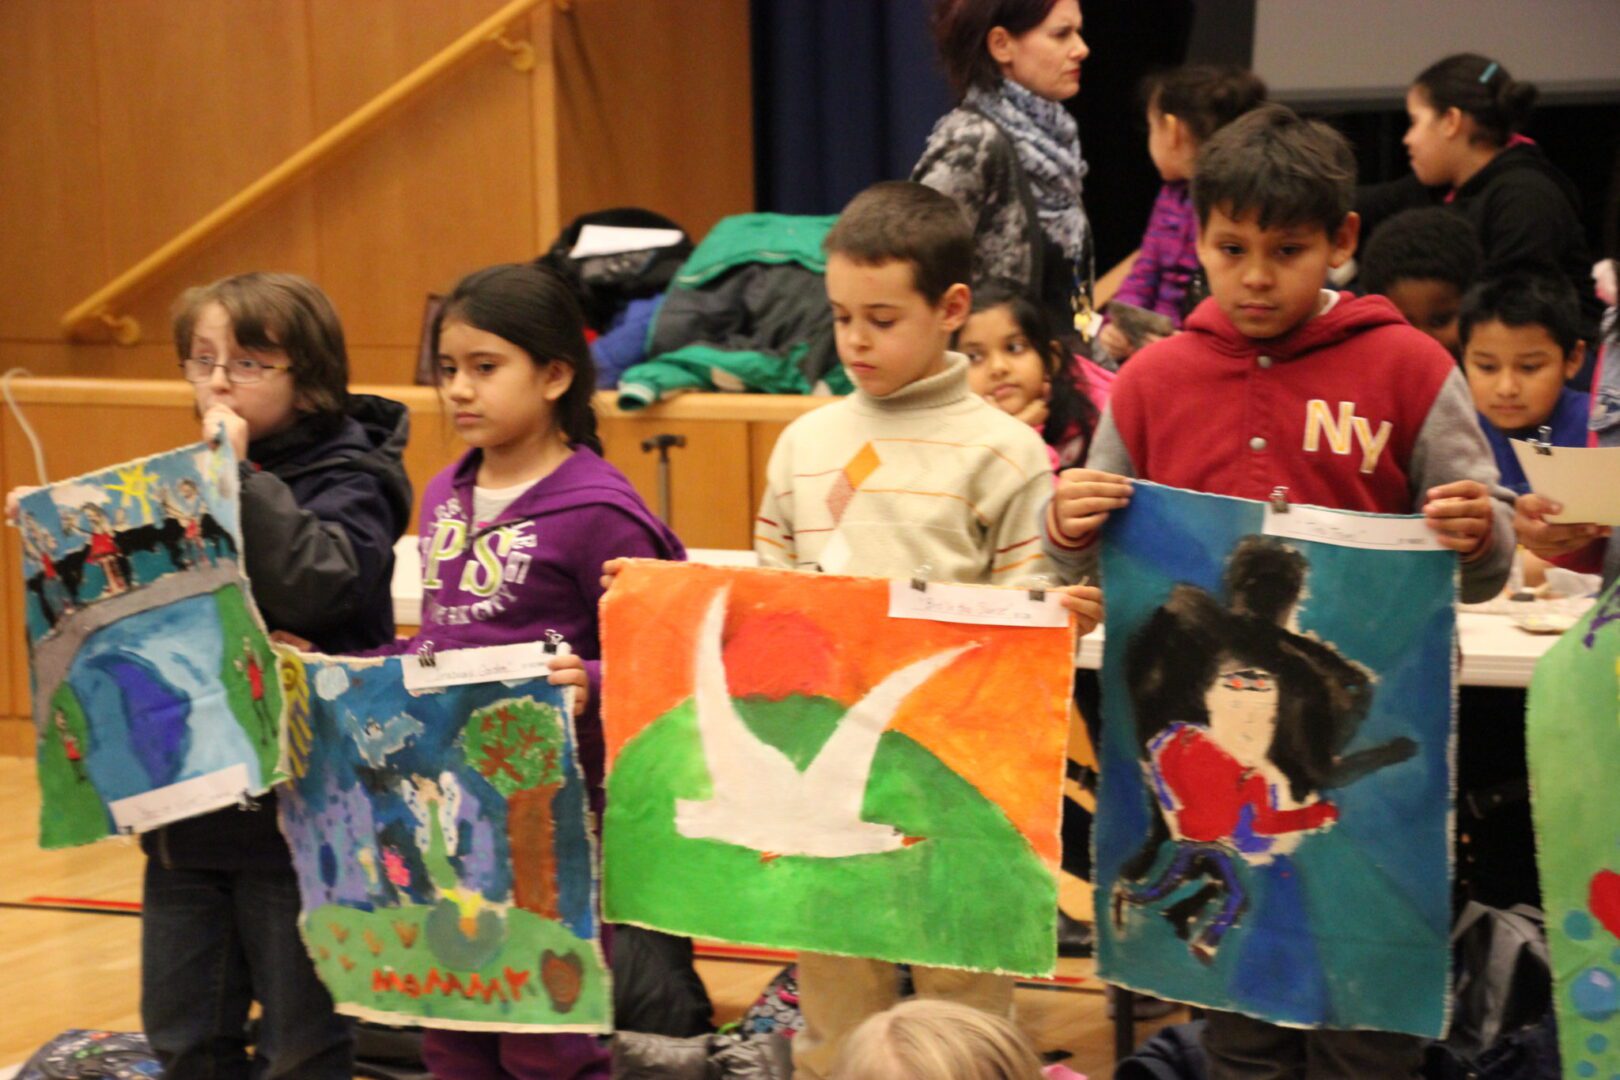 A group of children holding up paintings.